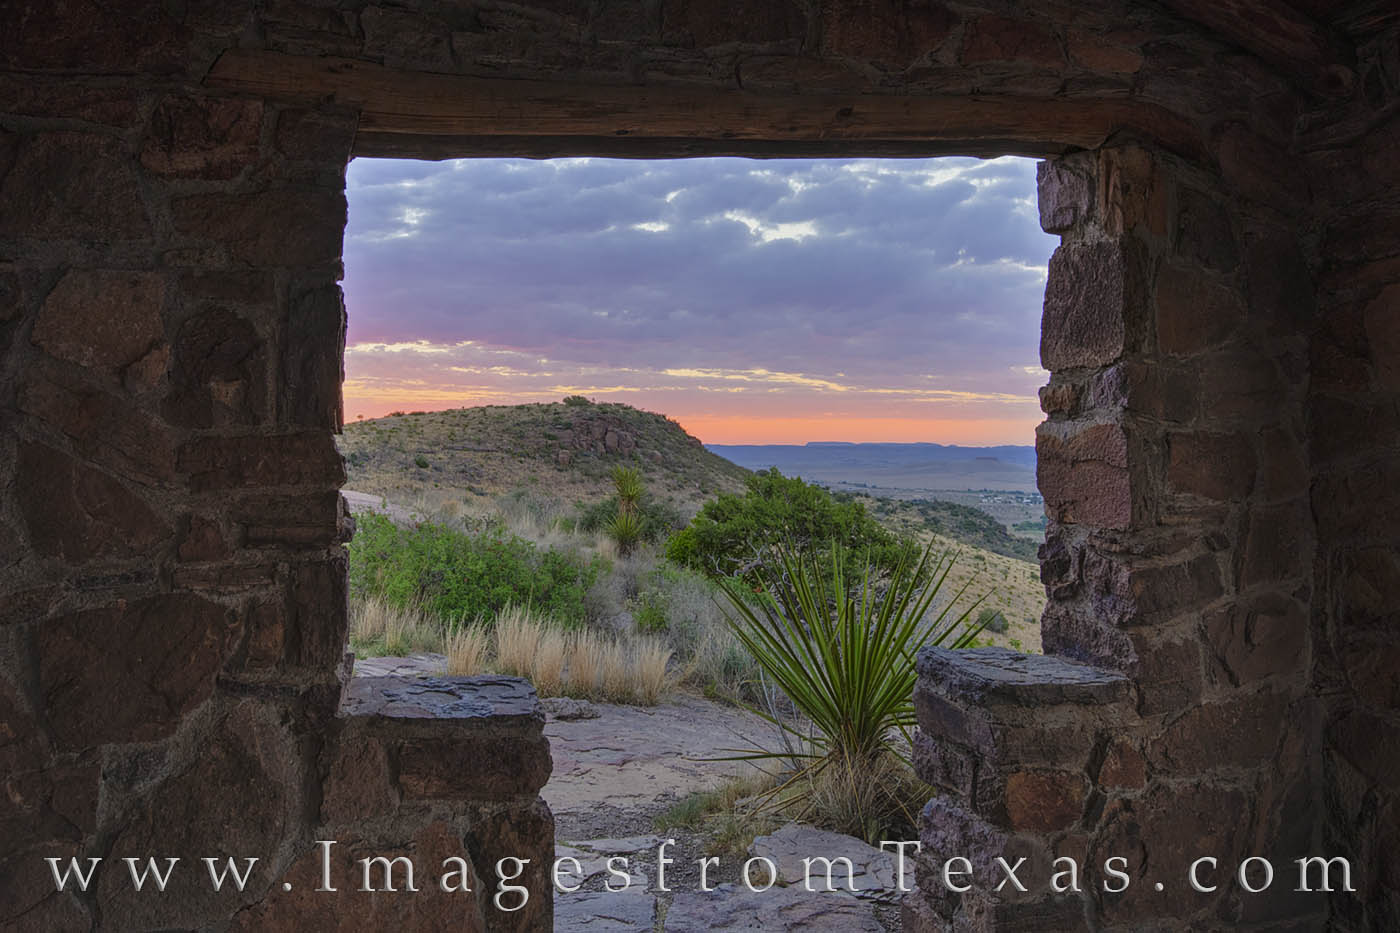 From inside a stone shelter along the CCC Trail in the Davis Mountains, this morning view looks out at the rugged landscape just...